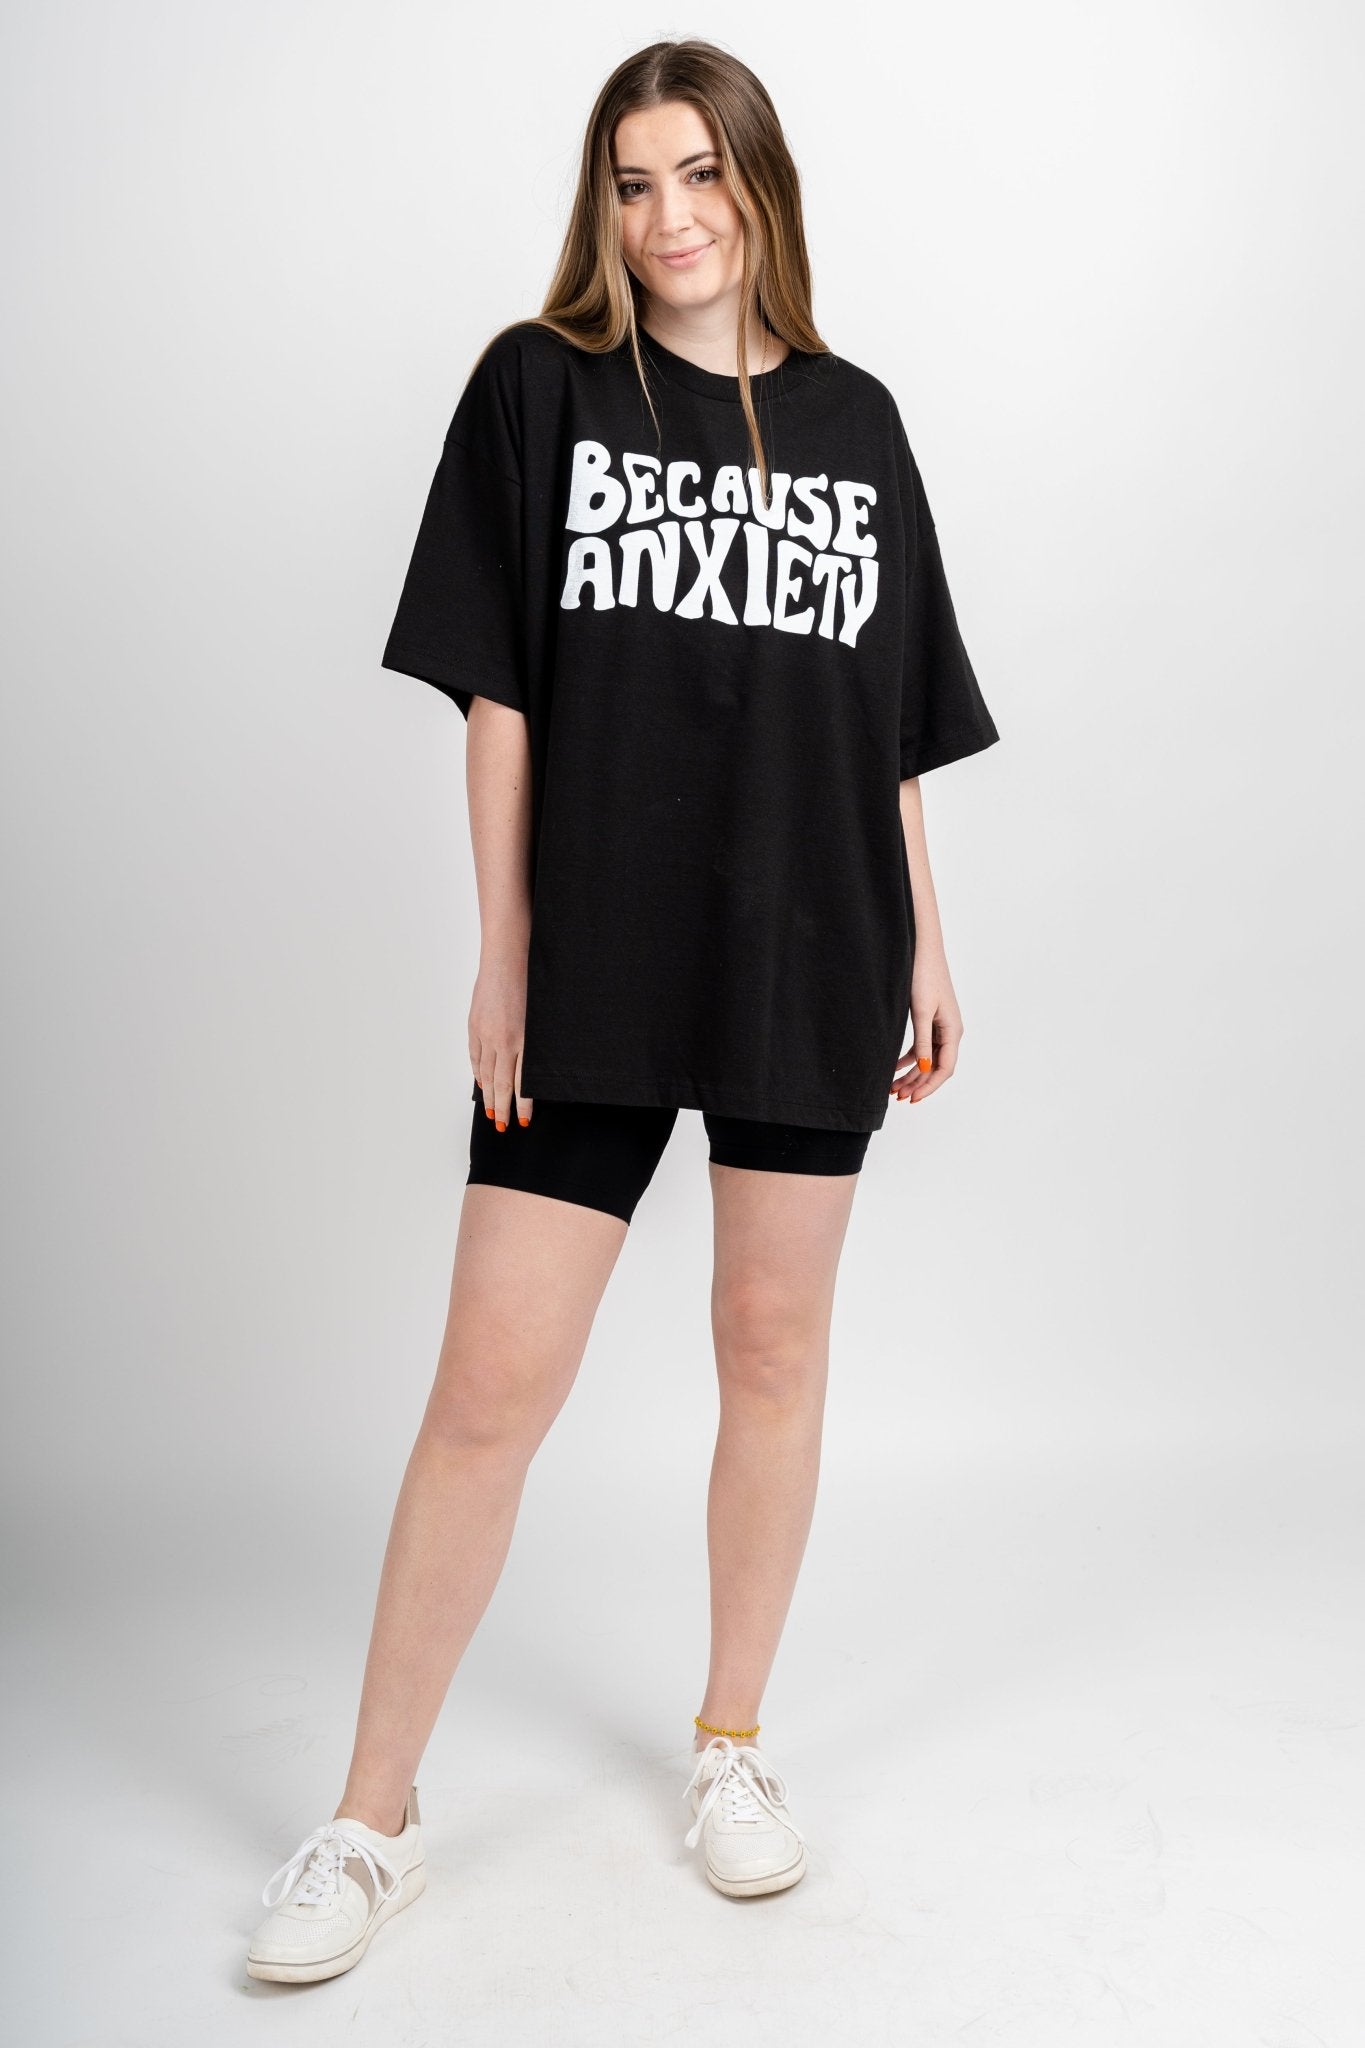 Because anxiety oversized t-shirt black - Trendy T-shirts - Cute Graphic Tee Fashion at Lush Fashion Lounge Boutique in Oklahoma